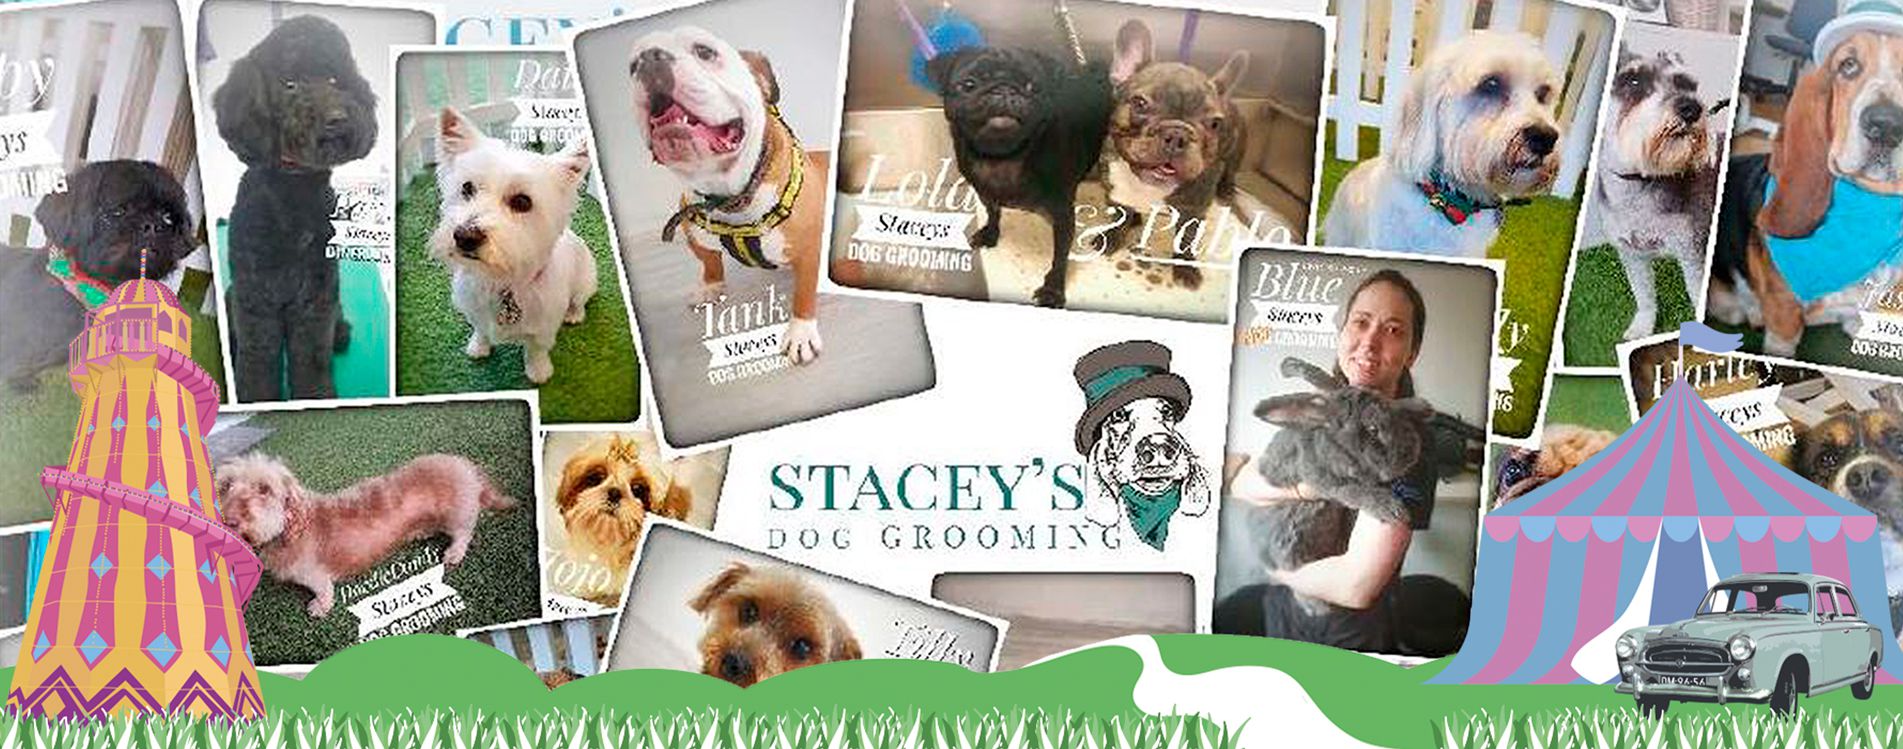 Stacey's-Dog-Grooming Leyland